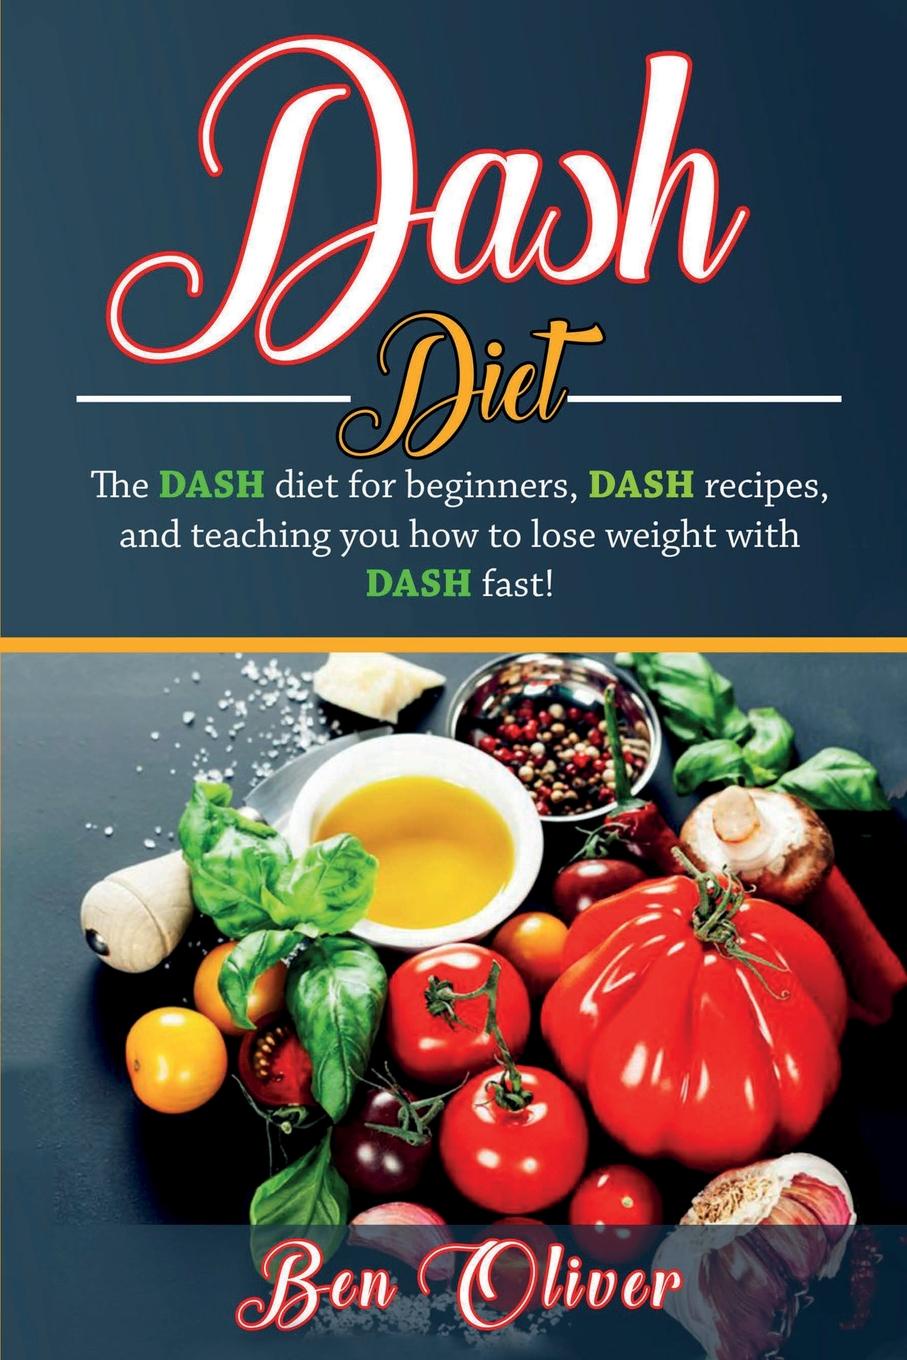 DASH Diet. The Dash diet for beginners, DASH recipes, and teaching you how to lose weight with DASH fast!